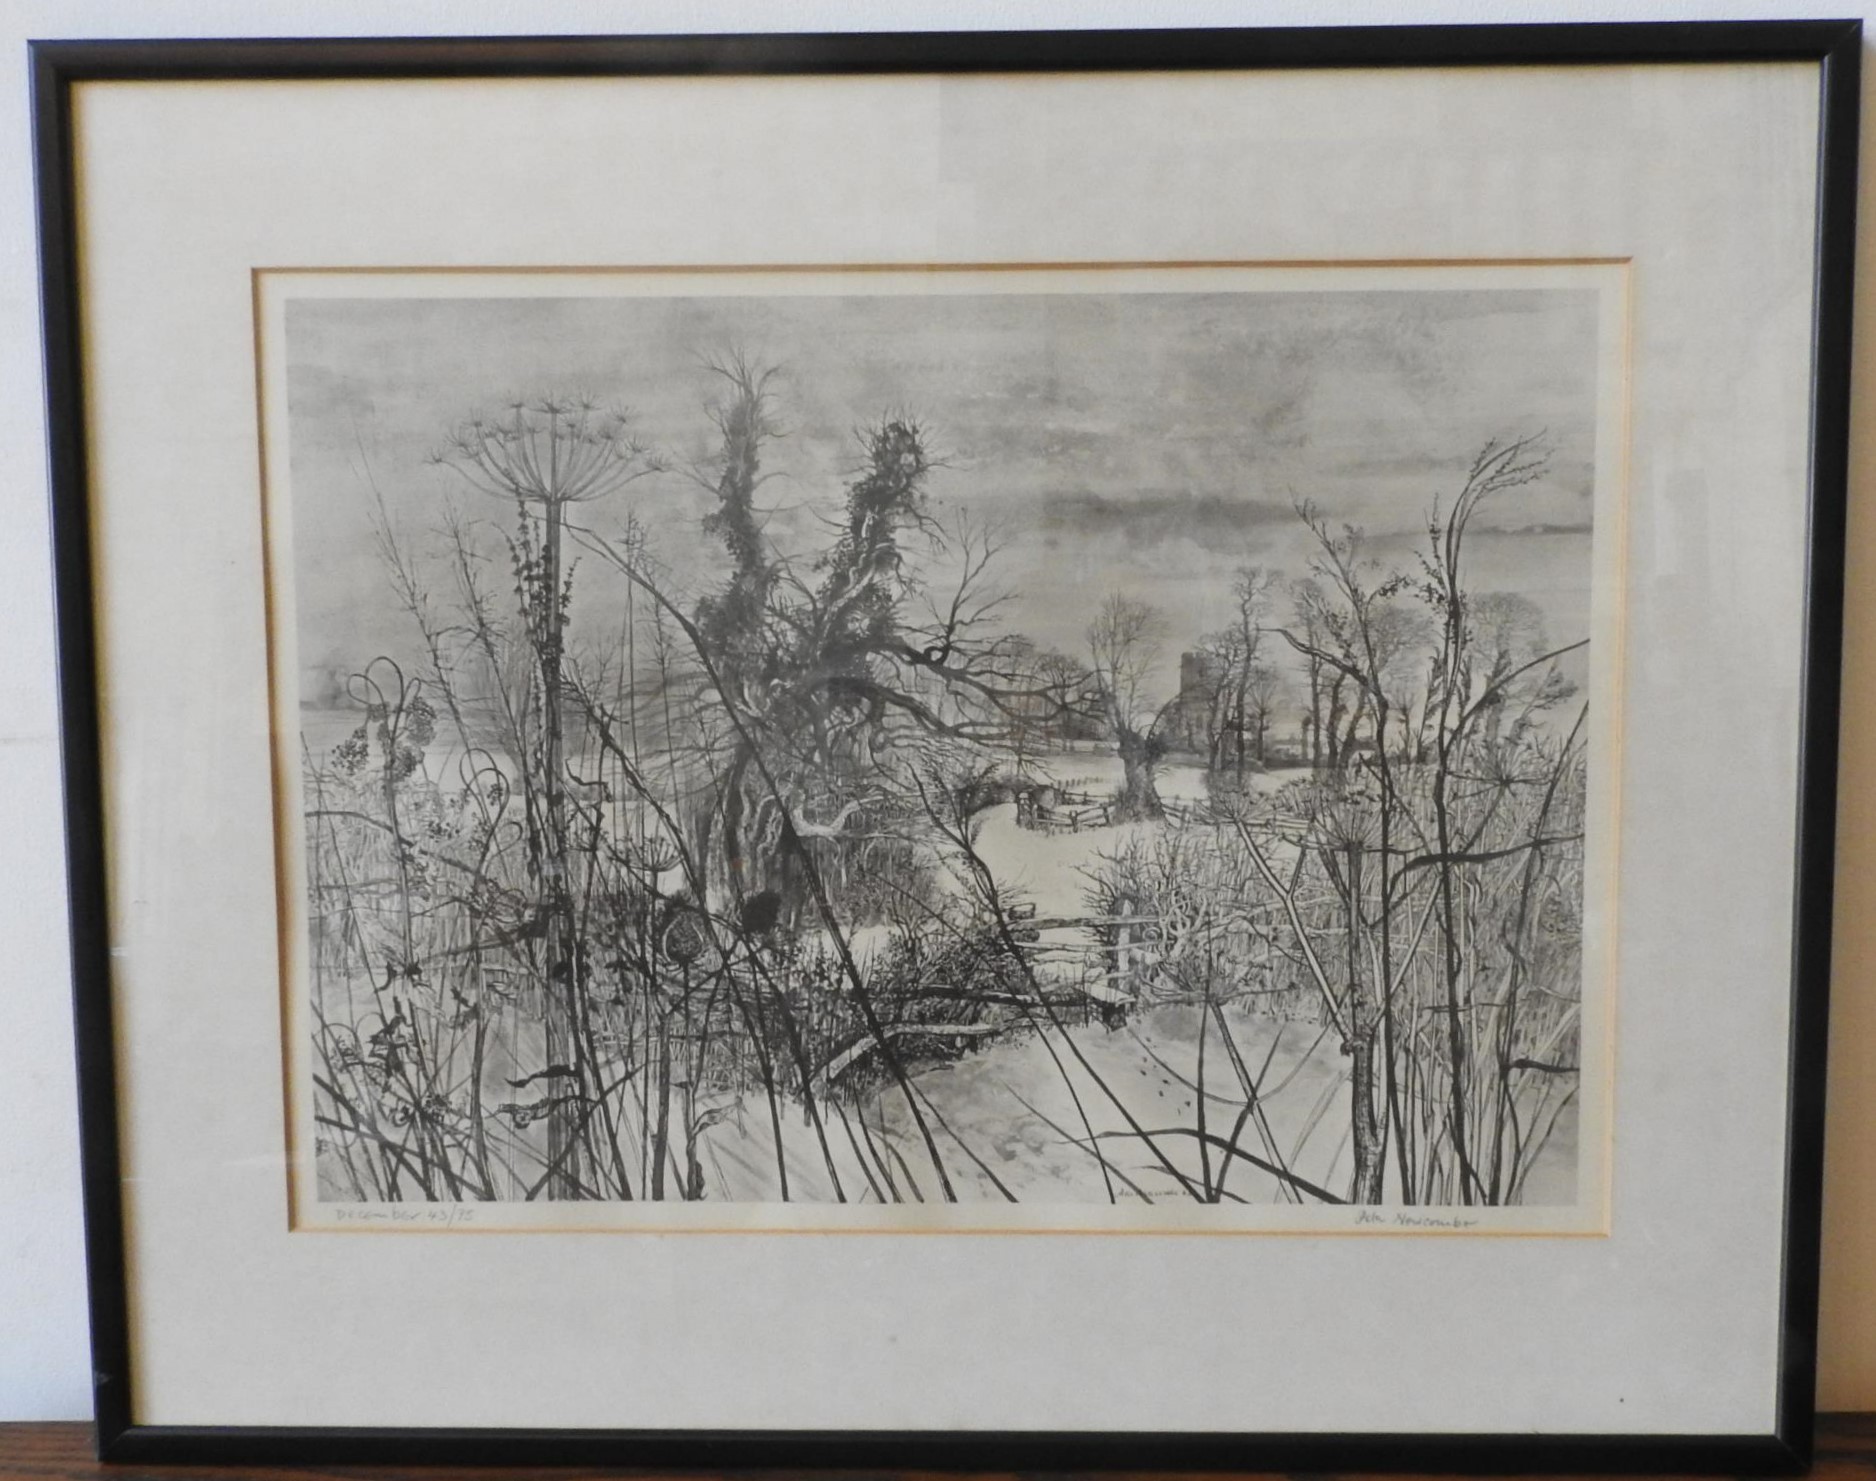 SIGNED AND NUMBERED WINTER SCENE MONOCHROME PRINT BY PETER , signed in pencil on lower edge and